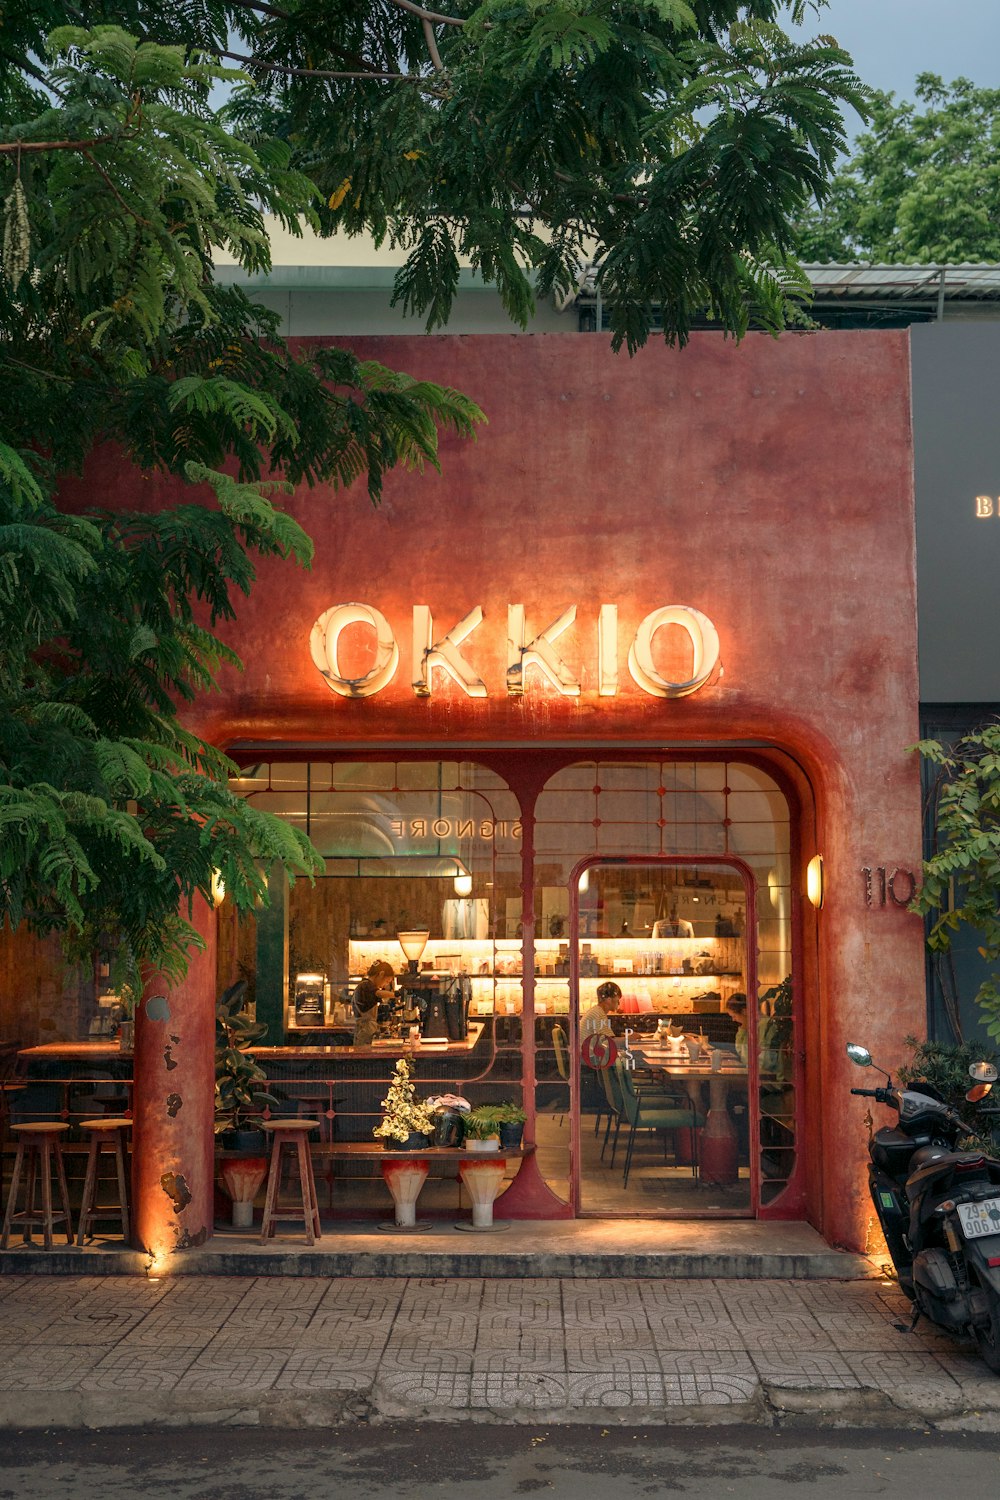 a building with a neon sign that says okko